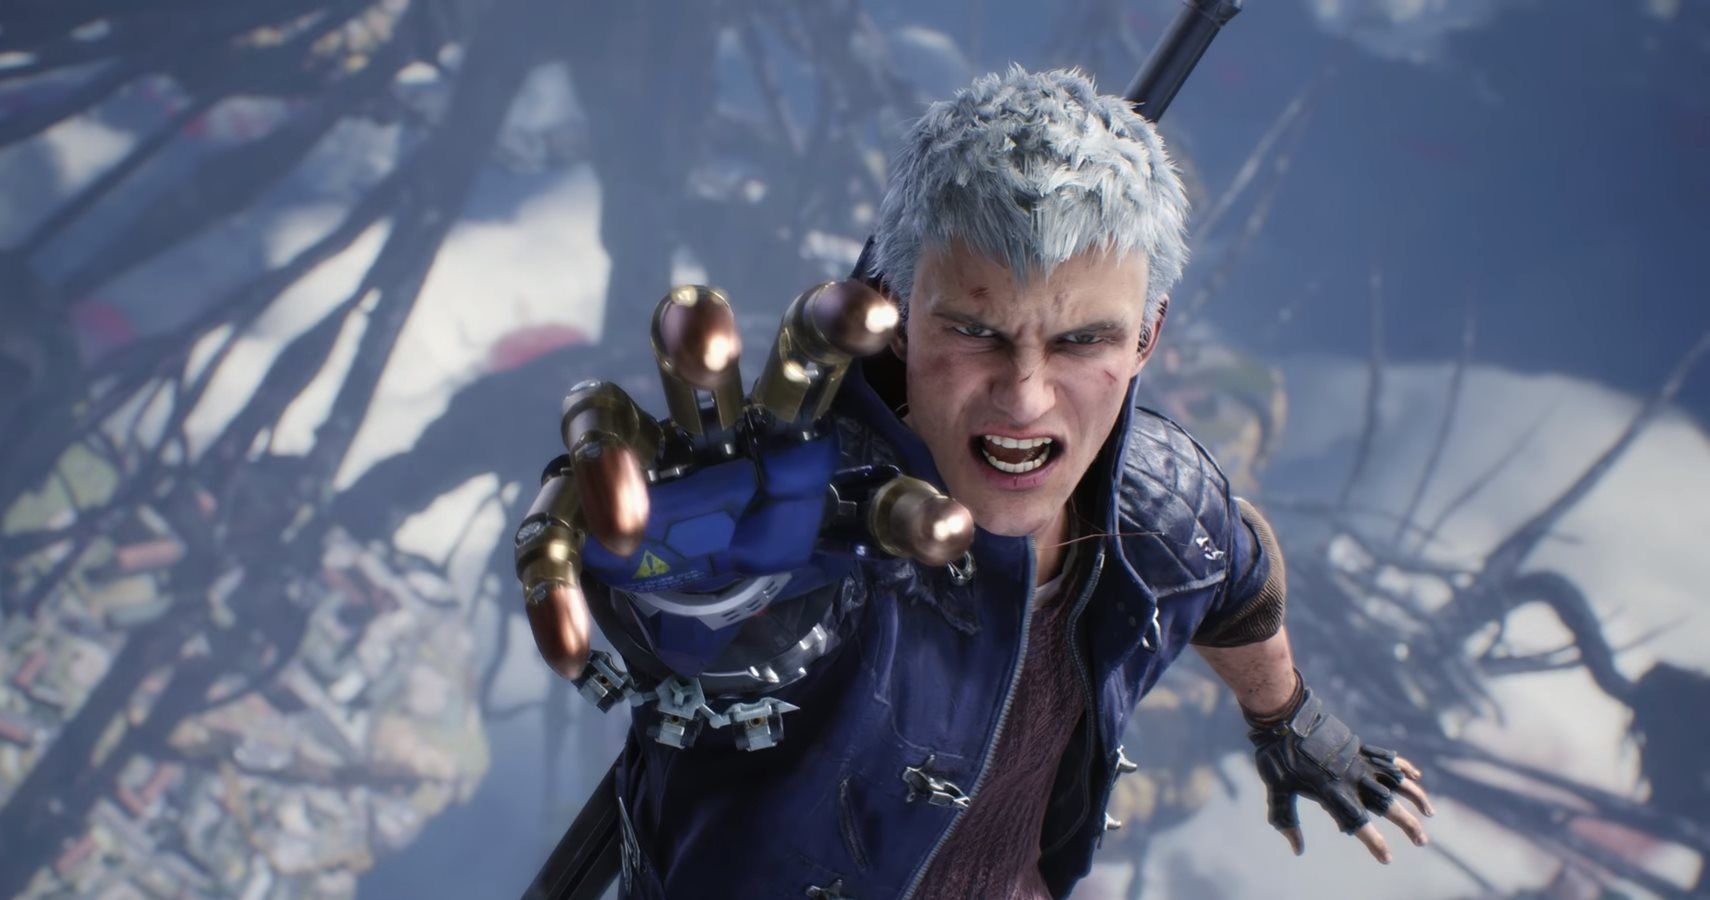 Spoiler Warning: Devil May Cry 5’s Final Trailer Gives Away Major Story Moments